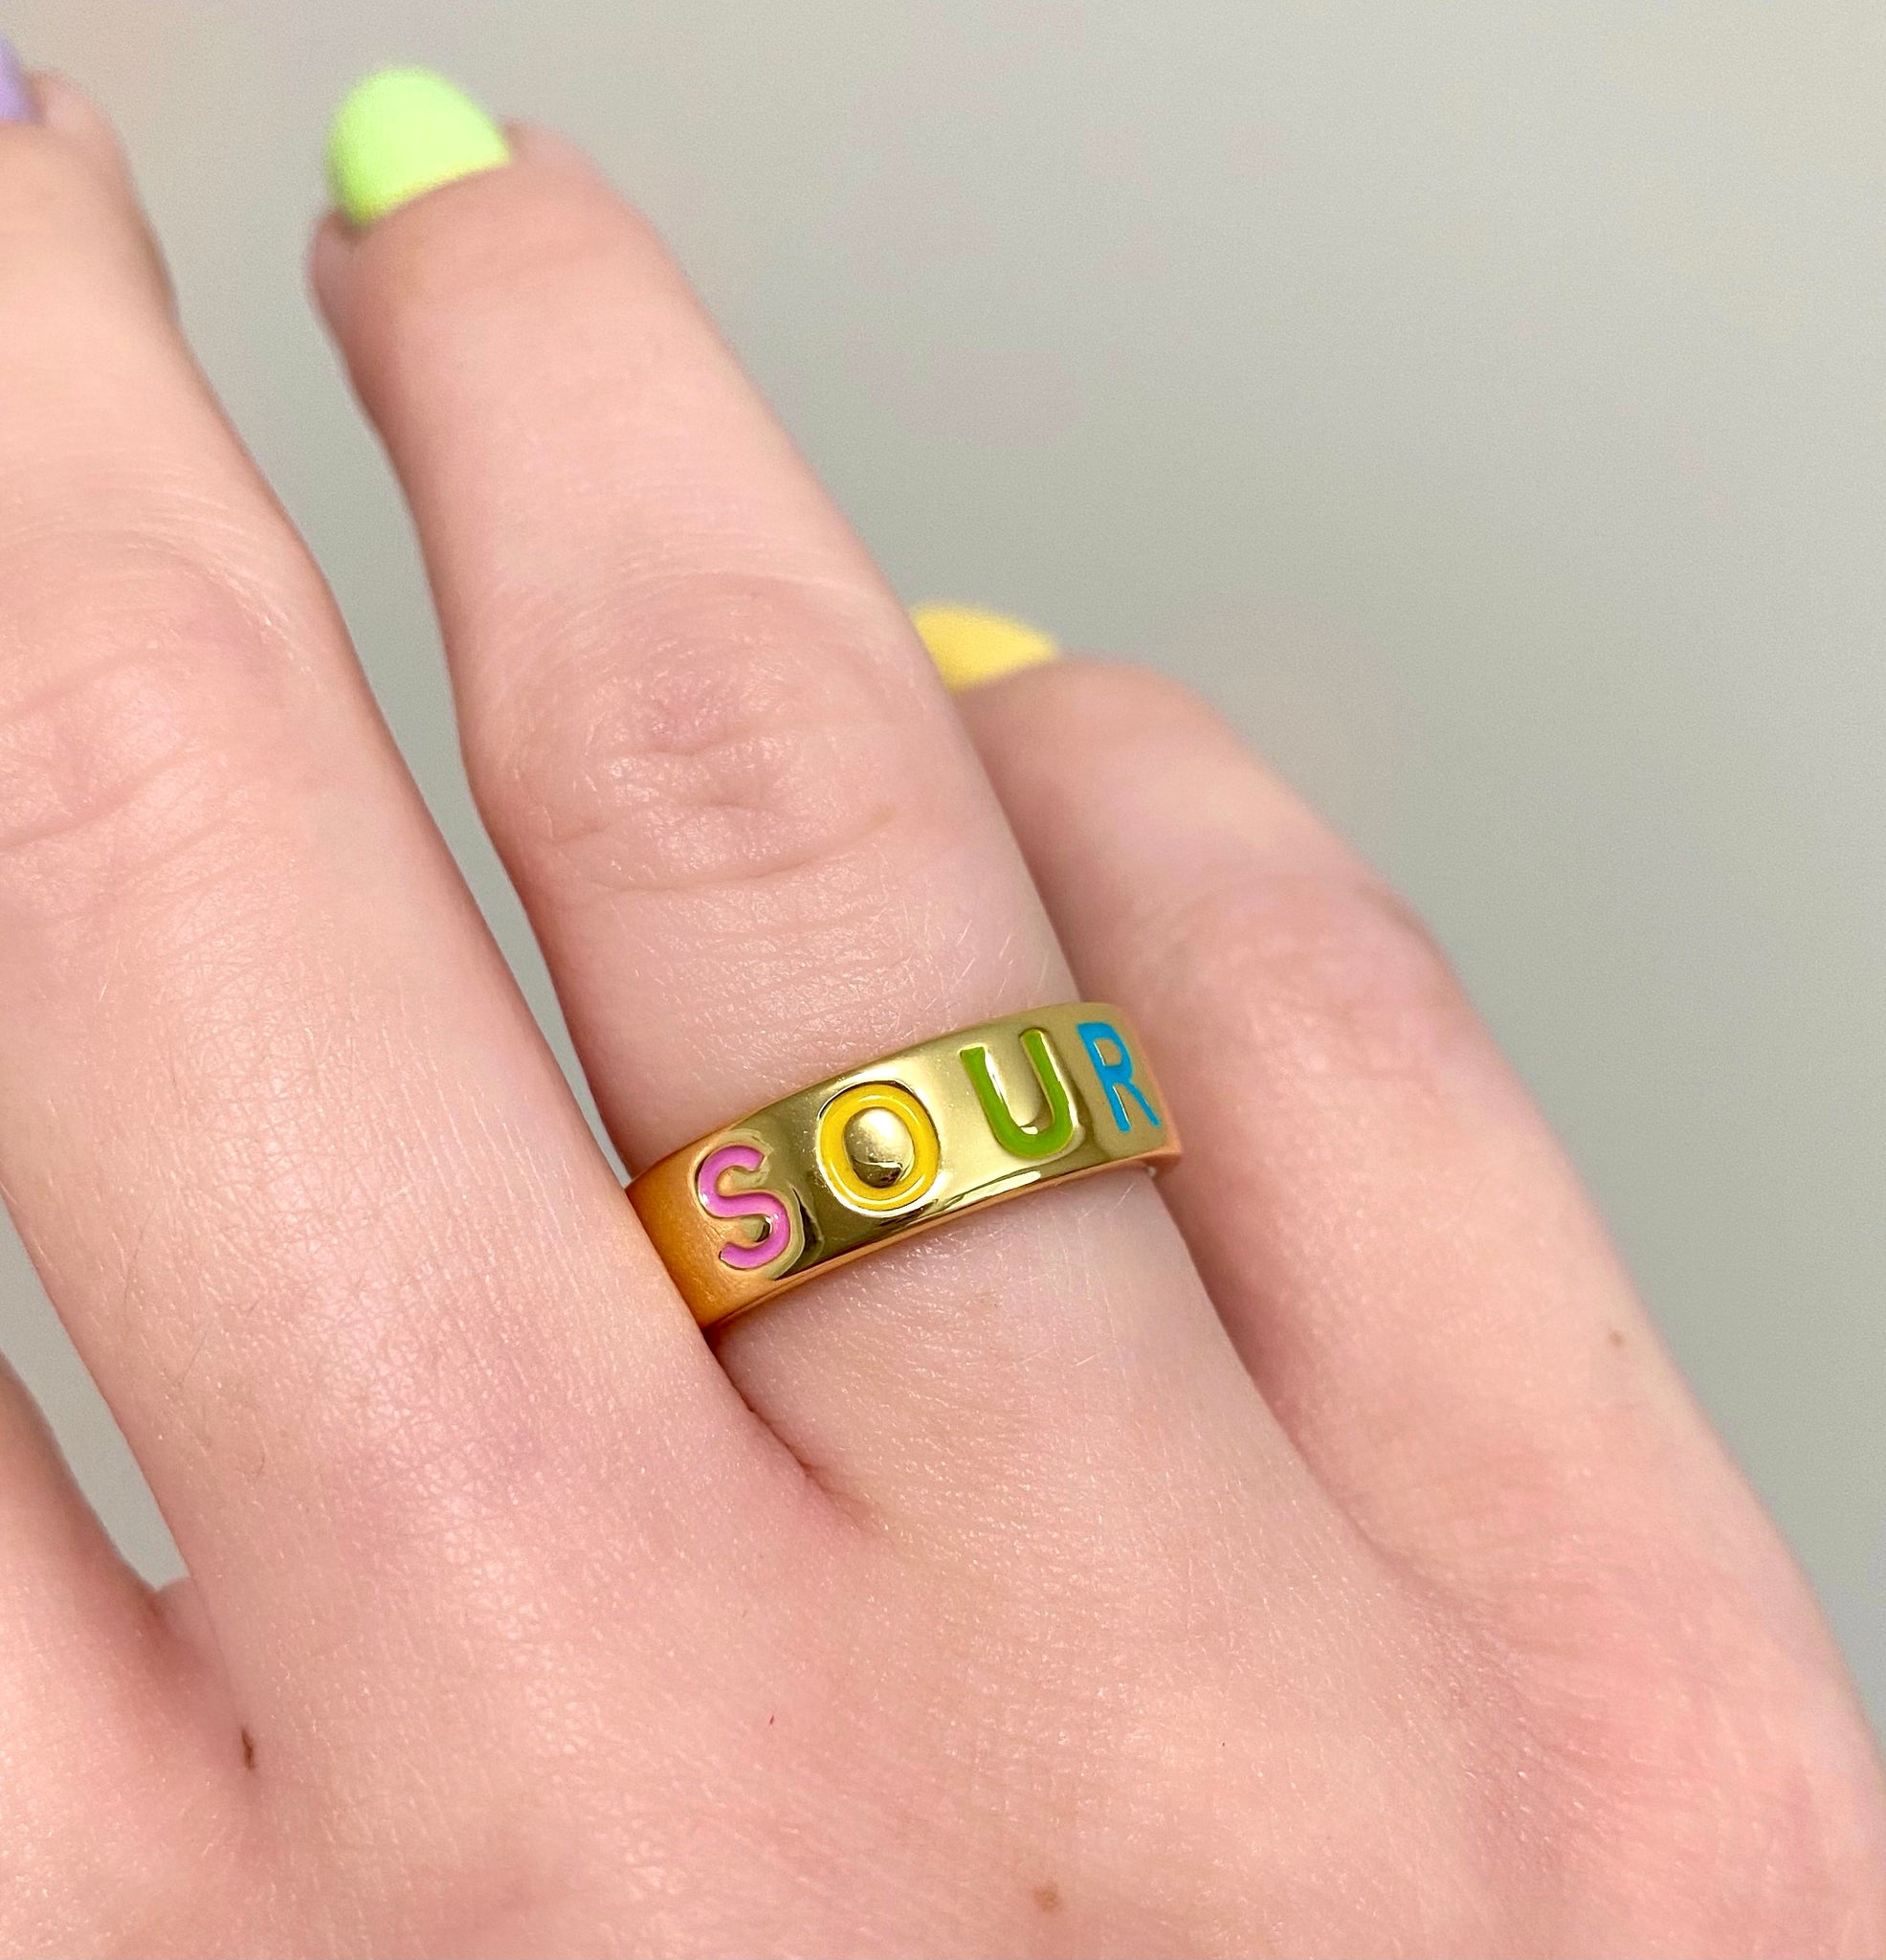 SOUR Ring